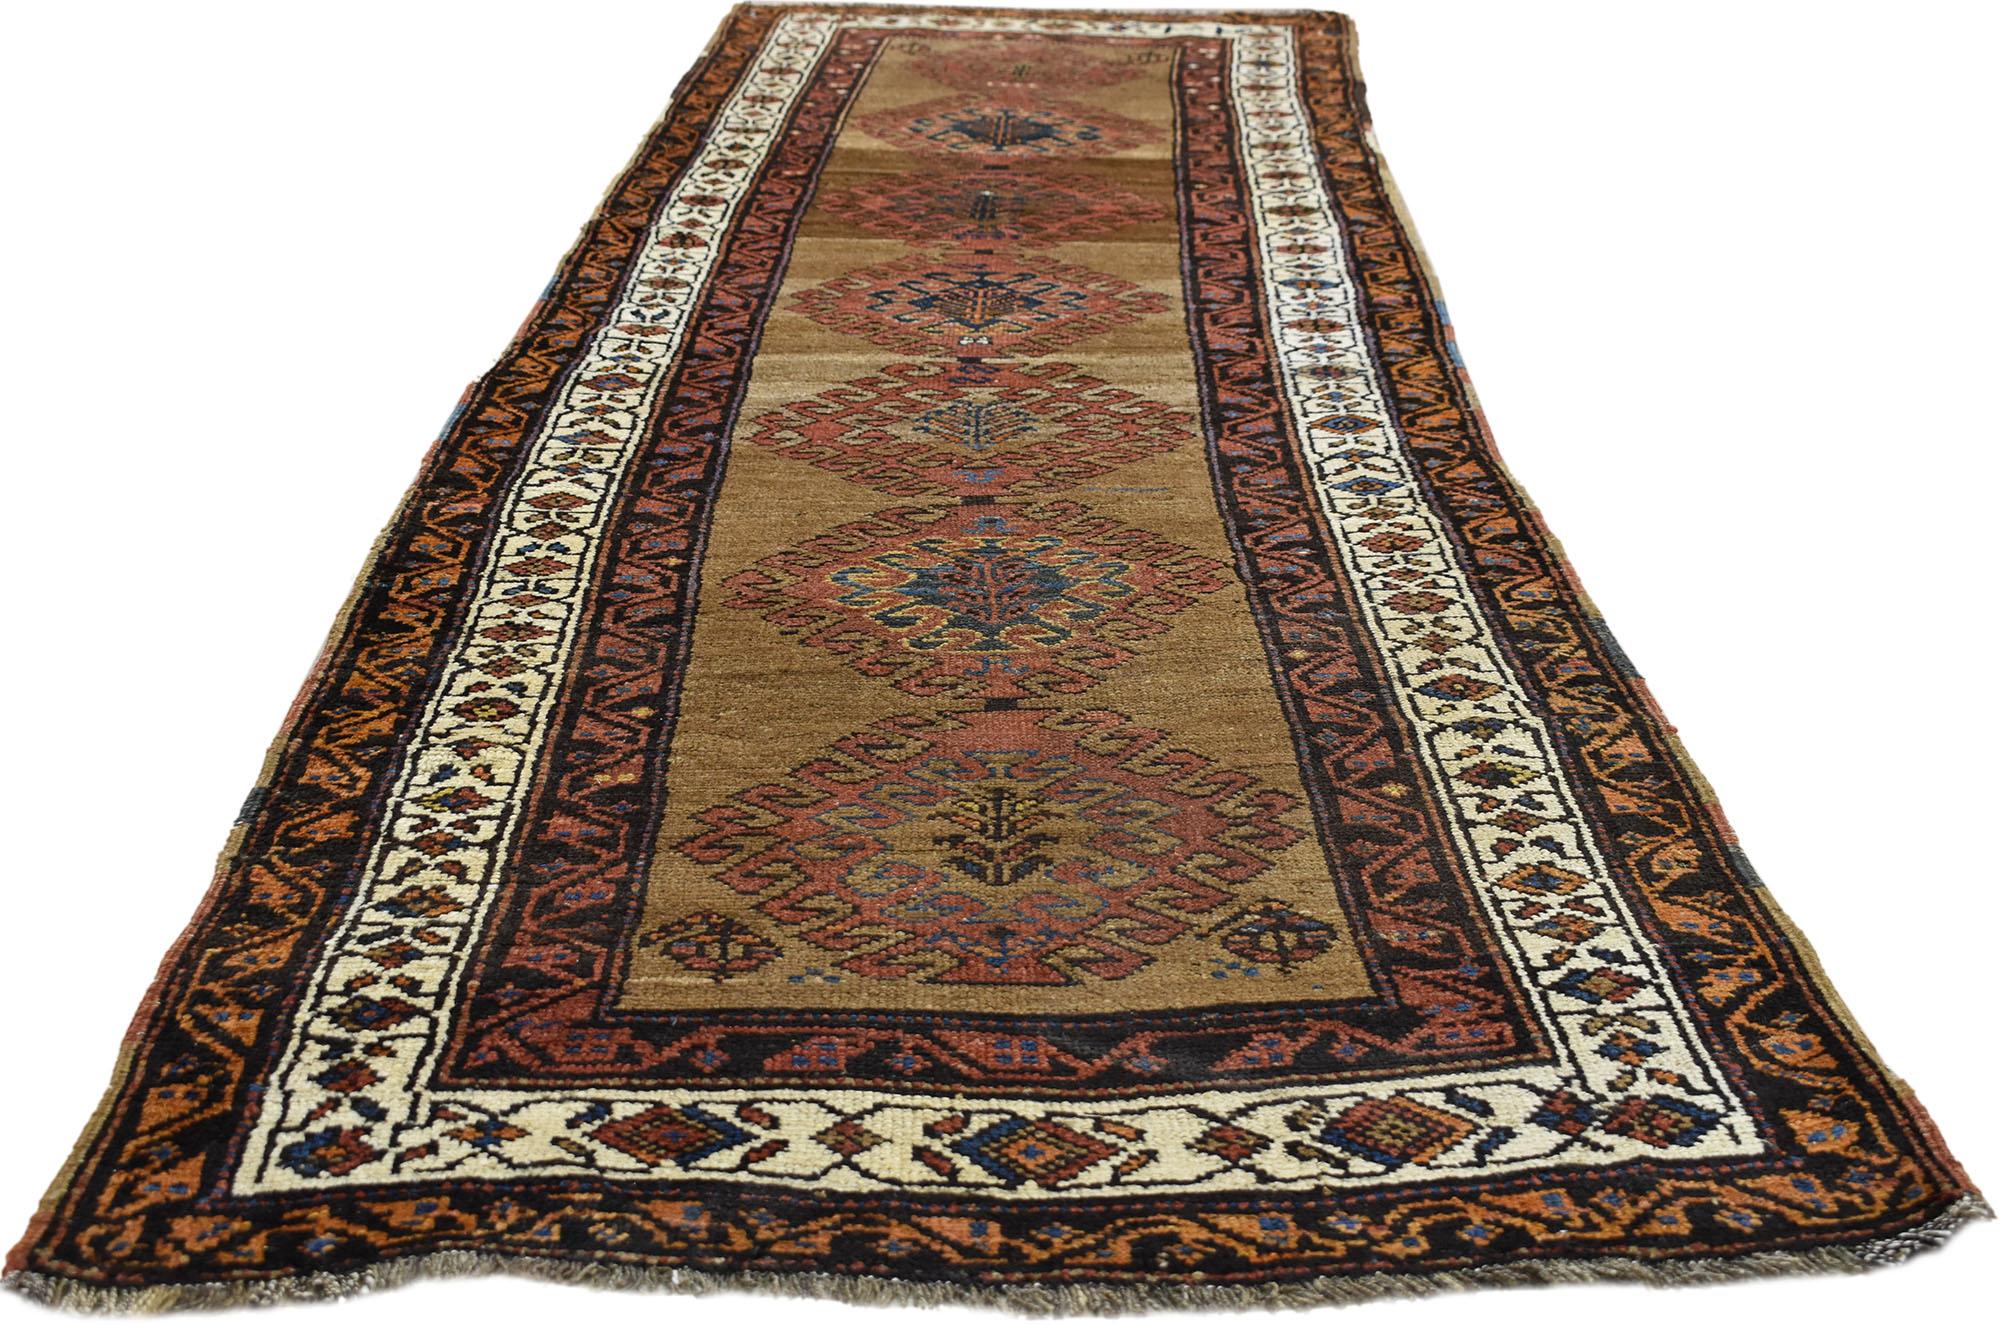 Antique Malayer Persian Runner with Warm Artisan and Mid-Century Modern Style In Good Condition For Sale In Dallas, TX